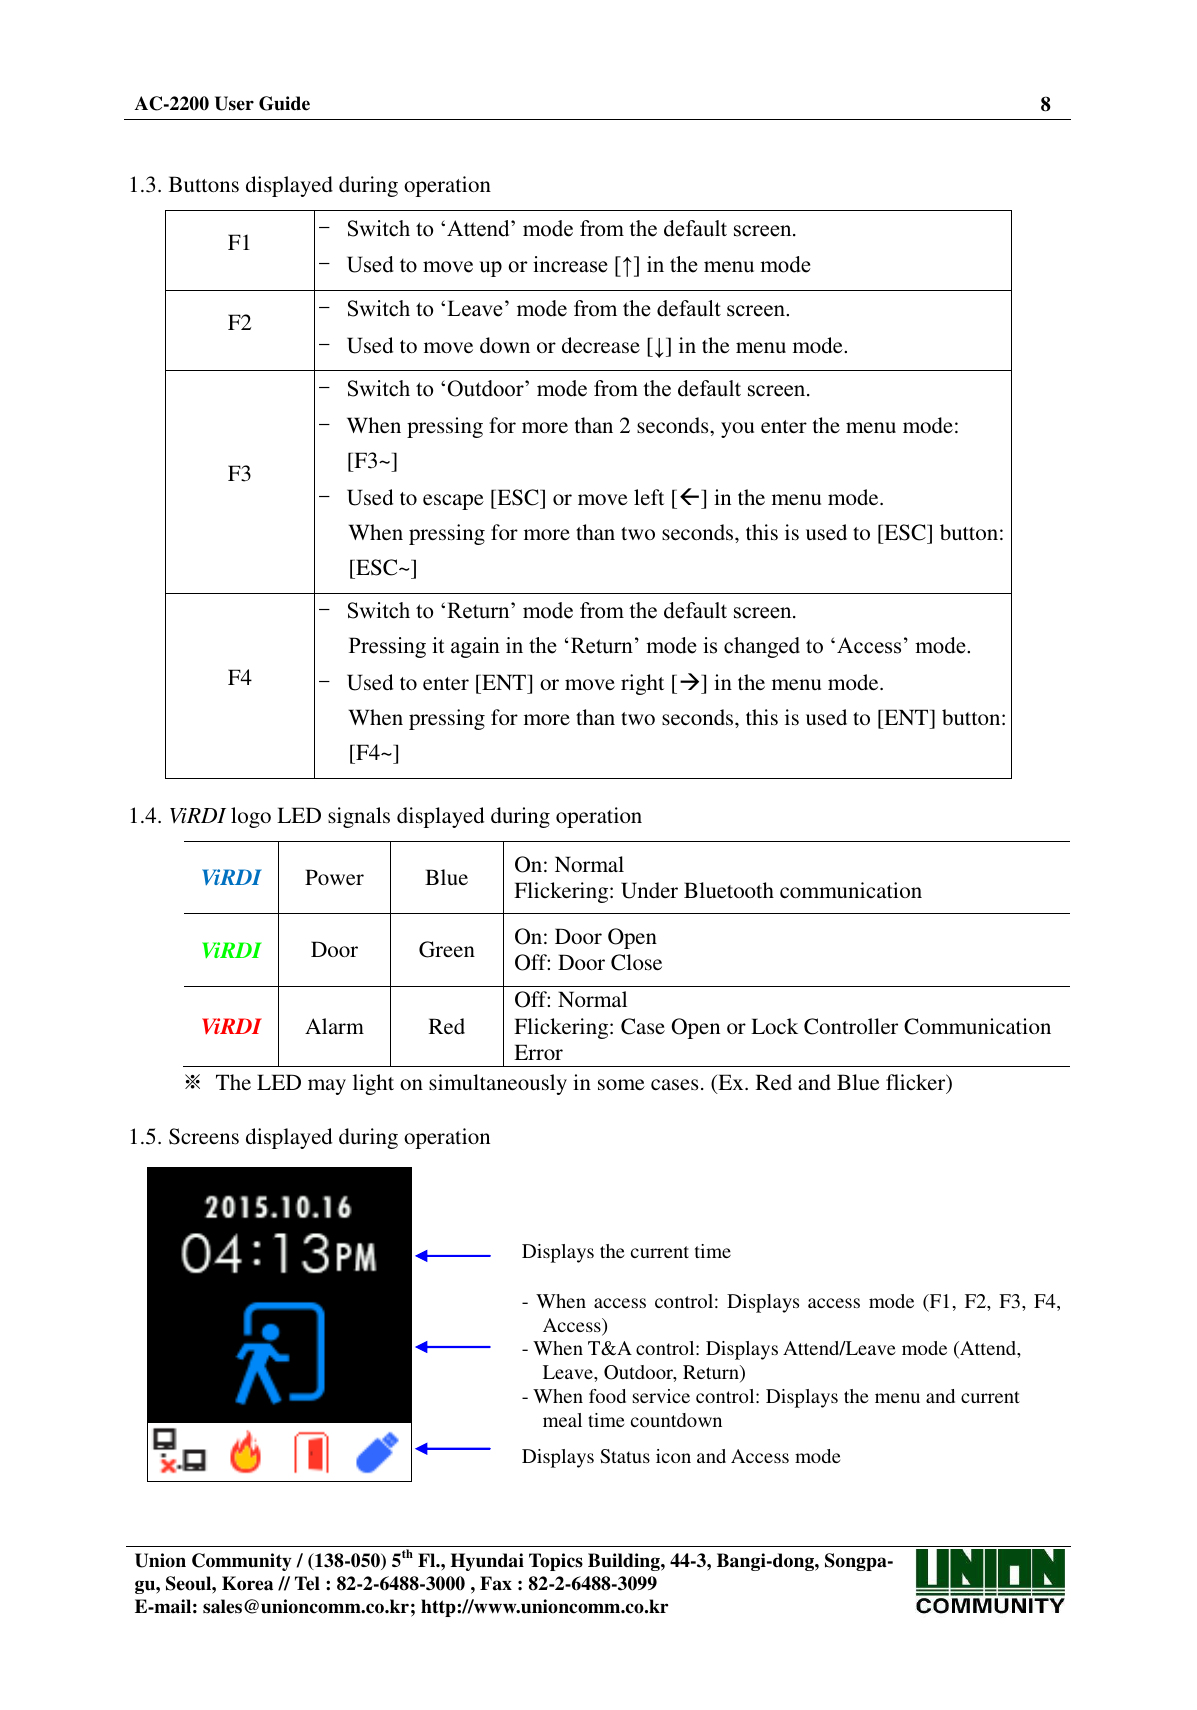  AC-2200 User Guide 8   Union Community / (138-050) 5th Fl., Hyundai Topics Building, 44-3, Bangi-dong, Songpa-gu, Seoul, Korea // Tel : 82-2-6488-3000 , Fax : 82-2-6488-3099 E-mail: sales@unioncomm.co.kr; http://www.unioncomm.co.kr    1.3. Buttons displayed during operation  F1 - Switch to ‘Attend’ mode from the default screen. - Used to move up or increase [↑] in the menu mode F2 - Switch to ‘Leave’ mode from the default screen. - Used to move down or decrease [↓] in the menu mode. F3 - Switch to ‘Outdoor’ mode from the default screen. - When pressing for more than 2 seconds, you enter the menu mode: [F3~] - Used to escape [ESC] or move left [] in the menu mode. When pressing for more than two seconds, this is used to [ESC] button: [ESC~] F4 - Switch to ‘Return’ mode from the default screen. Pressing it again in the ‘Return’ mode is changed to ‘Access’ mode. - Used to enter [ENT] or move right [] in the menu mode. When pressing for more than two seconds, this is used to [ENT] button: [F4~]  1.4. ViRDI logo LED signals displayed during operation  ViRDI Power Blue On: Normal Flickering: Under Bluetooth communication ViRDI Door Green On: Door Open Off: Door Close ViRDI Alarm Red Off: Normal Flickering: Case Open or Lock Controller Communication Error  ※  The LED may light on simultaneously in some cases. (Ex. Red and Blue flicker)  1.5. Screens displayed during operation      Displays the current time - When access control: Displays access mode (F1, F2, F3, F4, Access) - When T&amp;A control: Displays Attend/Leave mode (Attend, Leave, Outdoor, Return) - When food service control: Displays the menu and current meal time countdown Displays Status icon and Access mode  